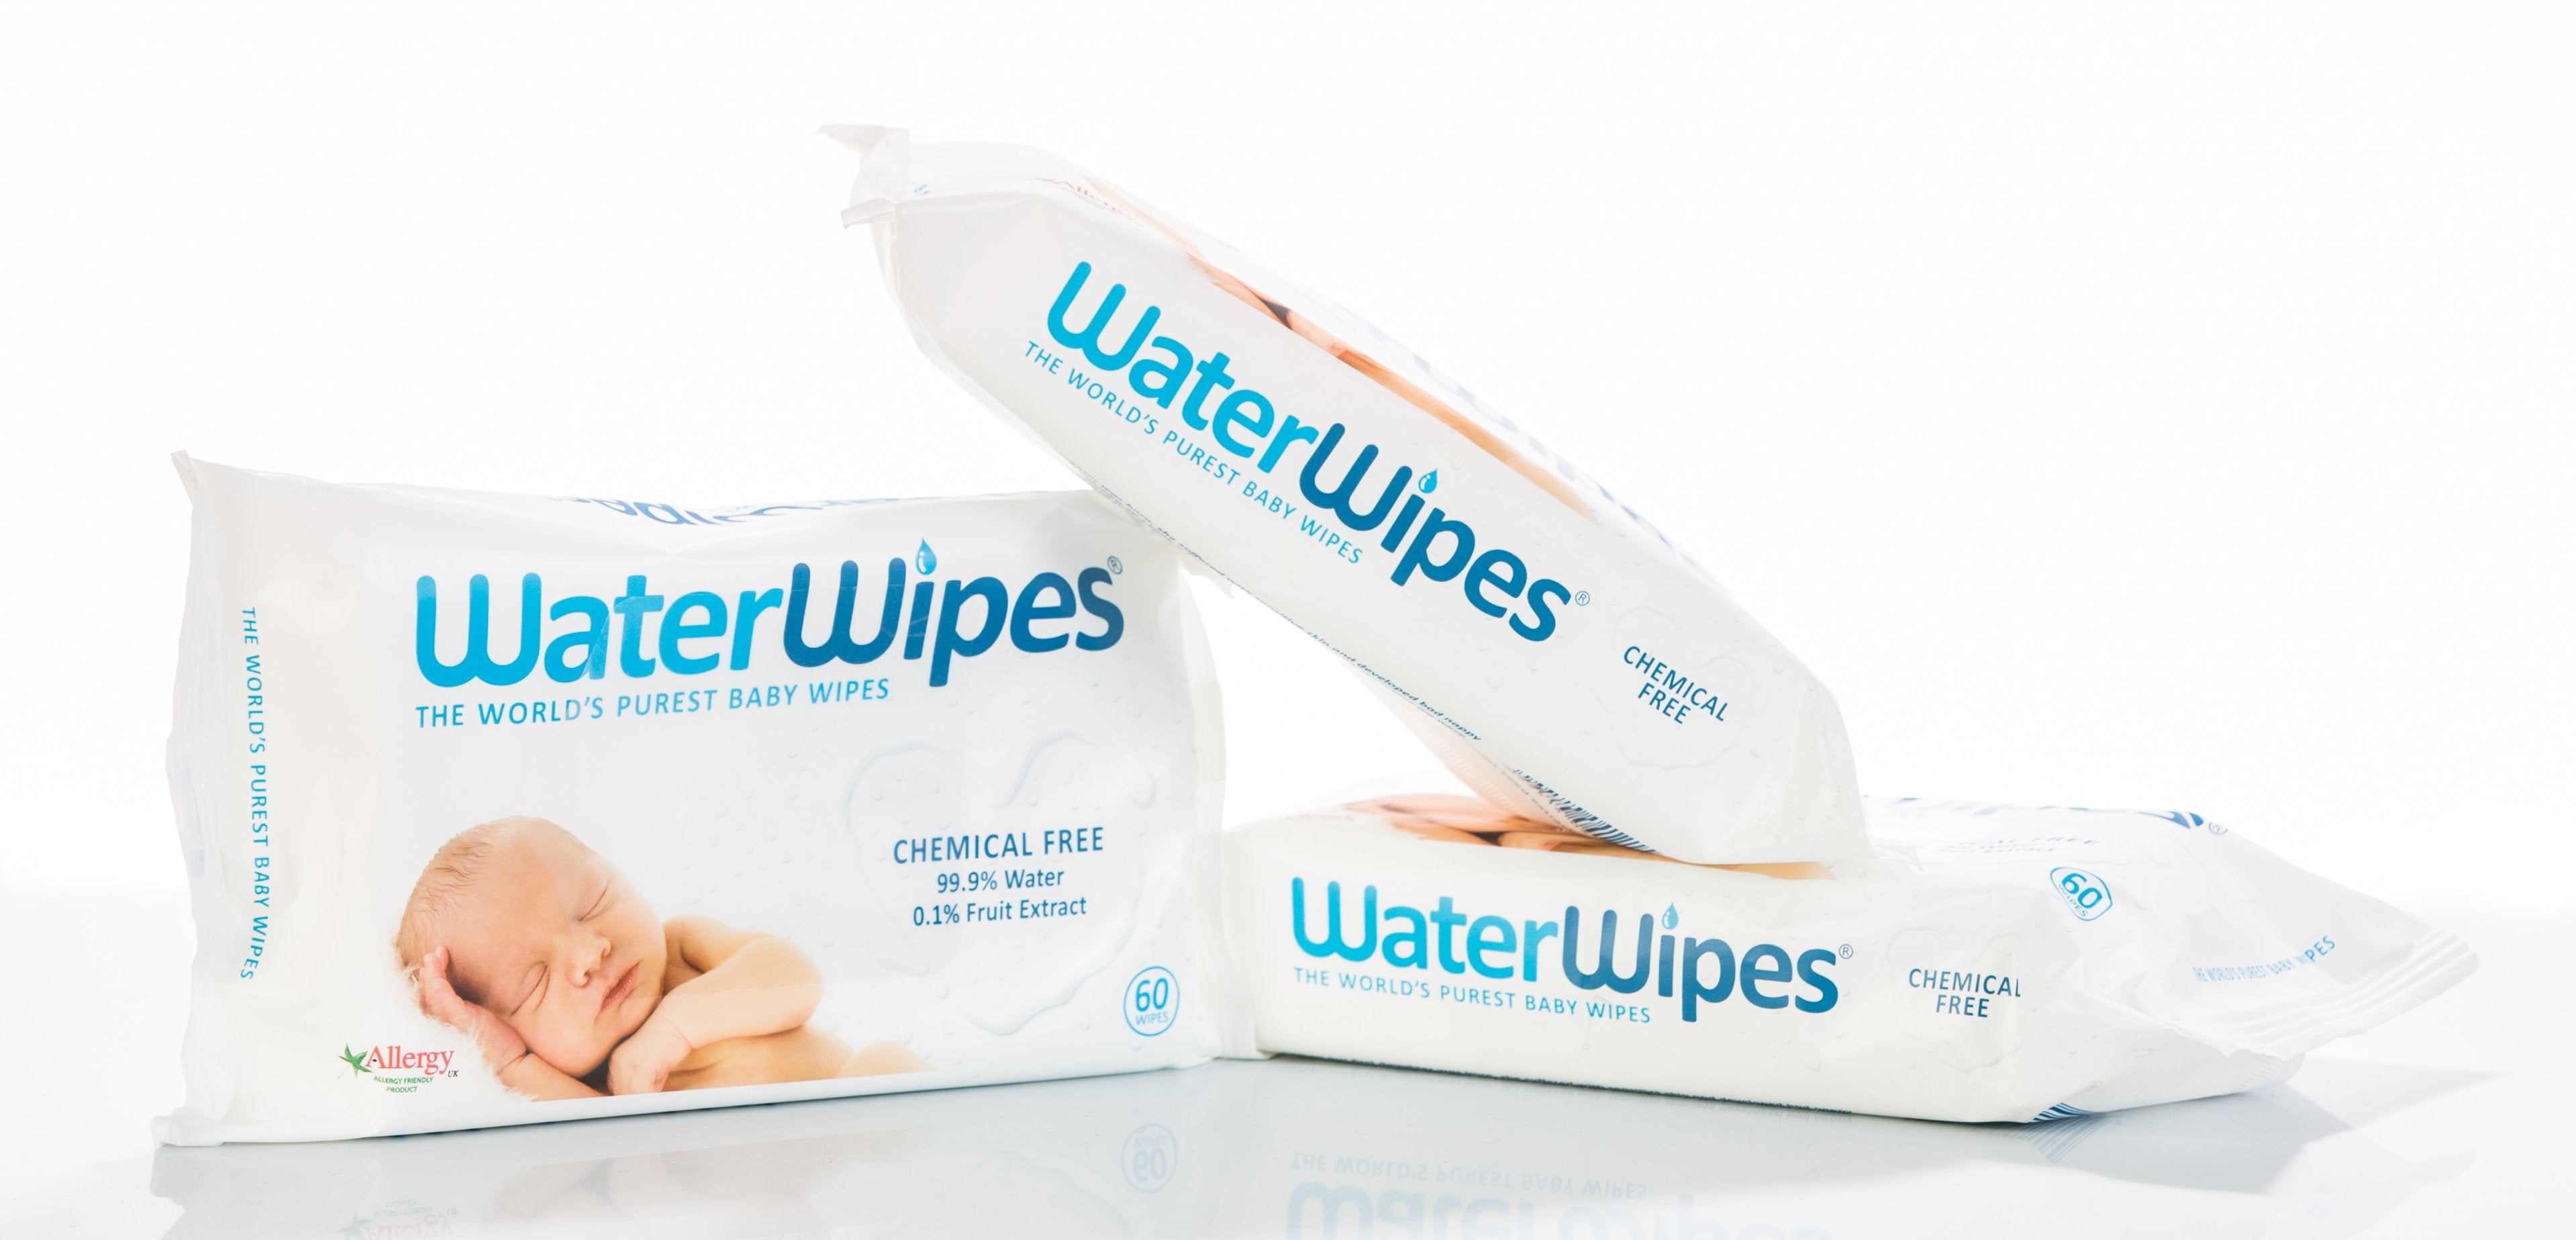 WaterWipes Baby Wipes, 4 Pack